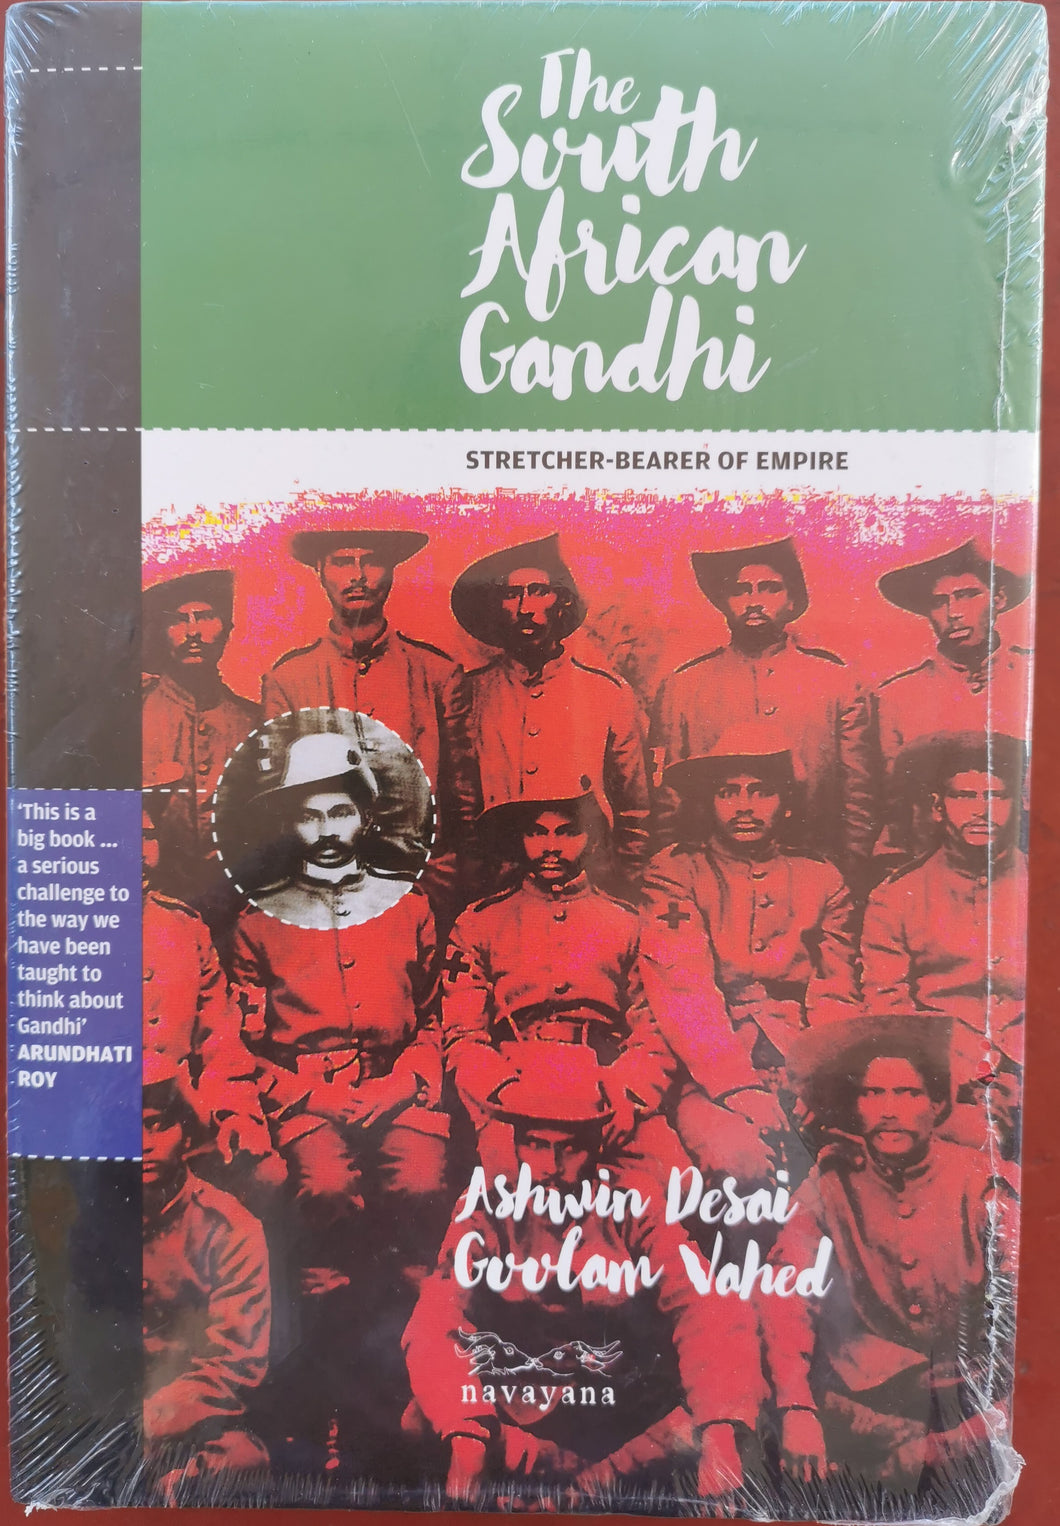 The South African Gandhi - Stretcher-Bearer of Empire by Ashwin Desai and Goolam Vahed